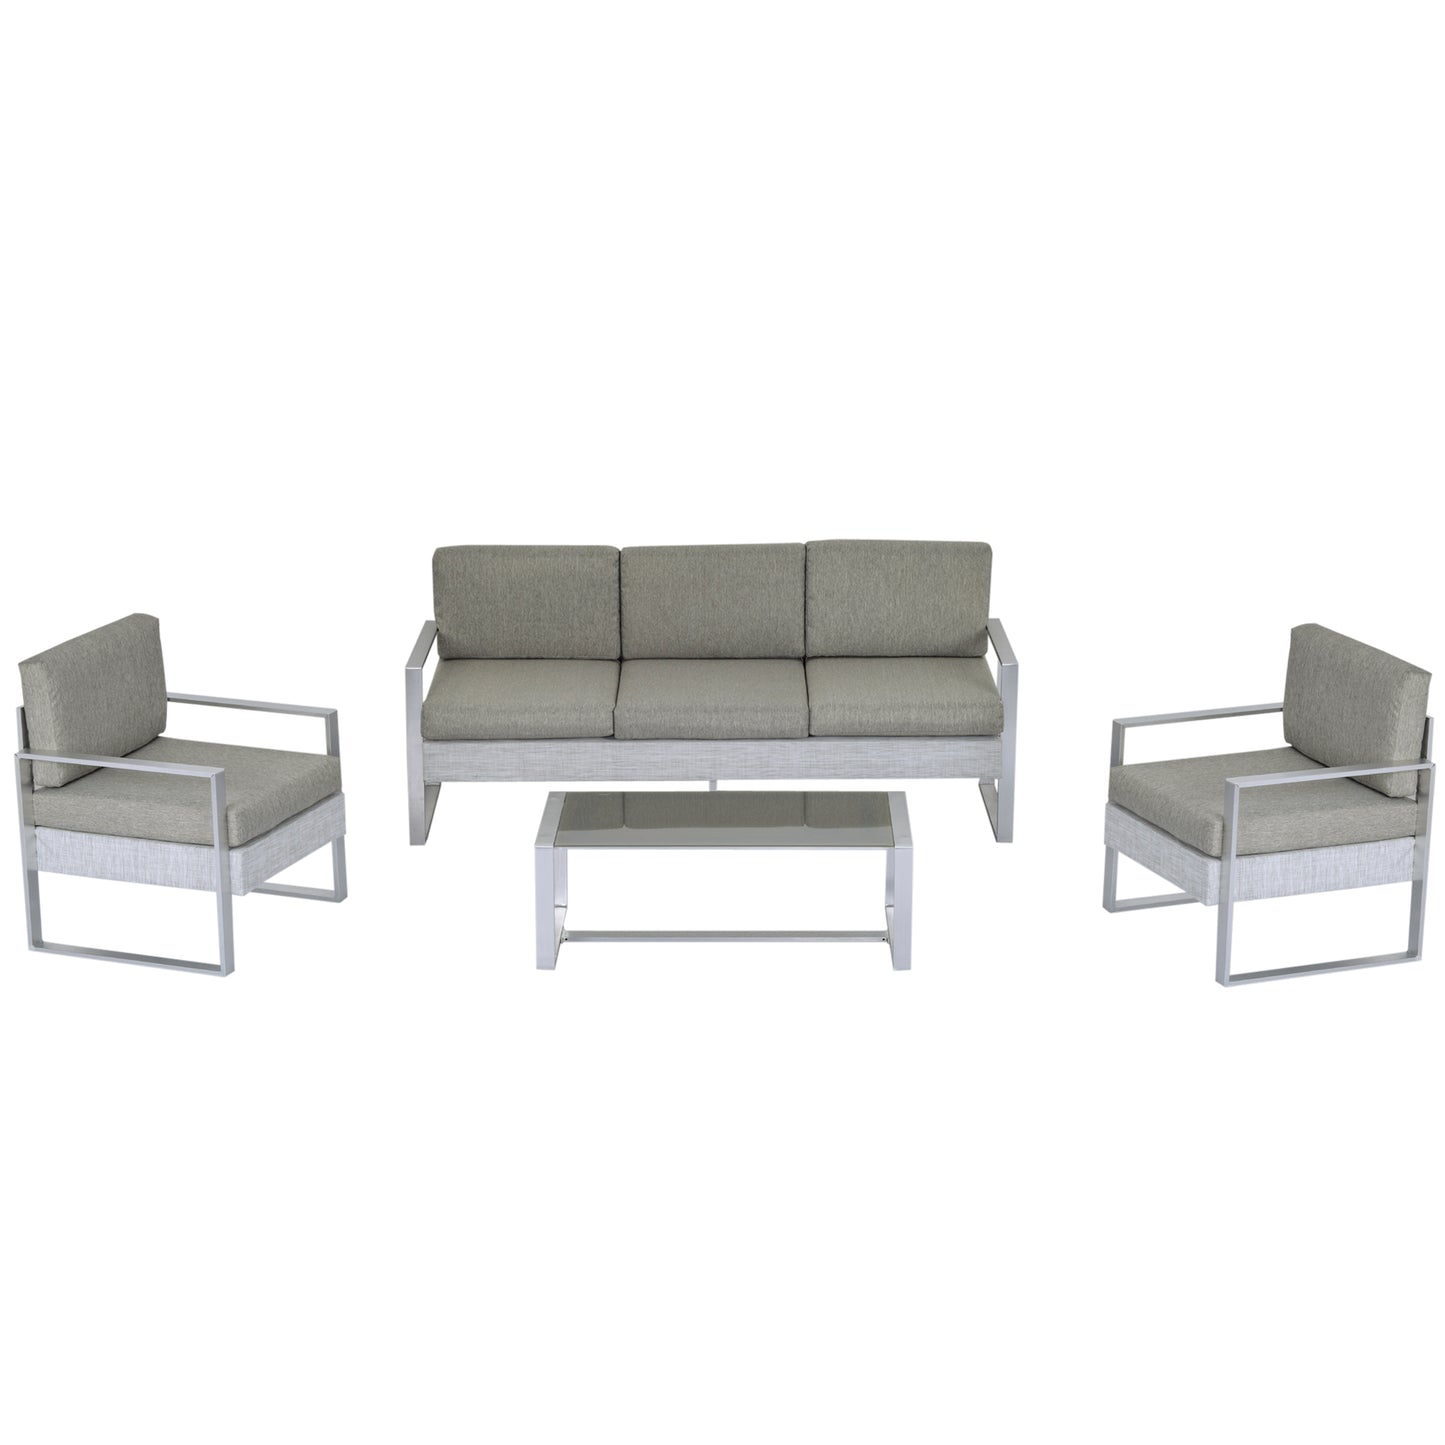 Outsunny 4 PCs Patio Conversation Furniture Set with Tempered Glass Coffee Table Aluminum